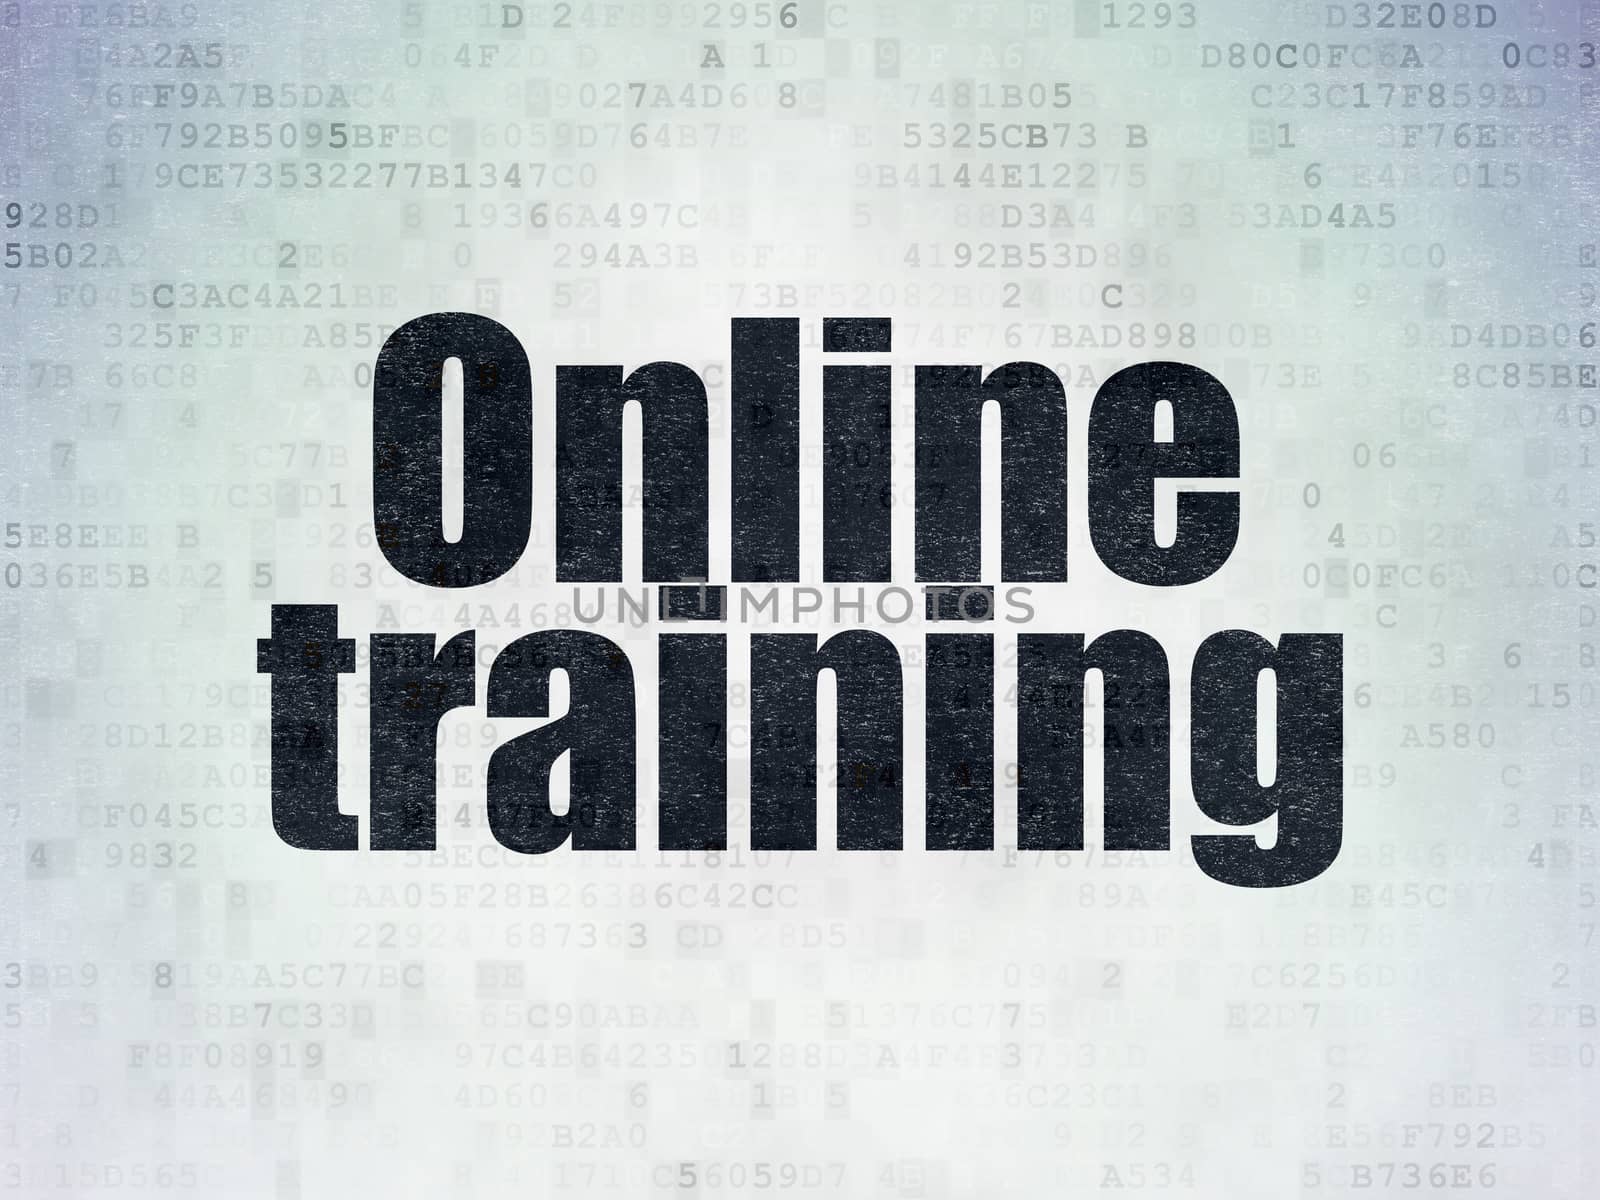 Learning concept: Painted black word Online Training on Digital Data Paper background